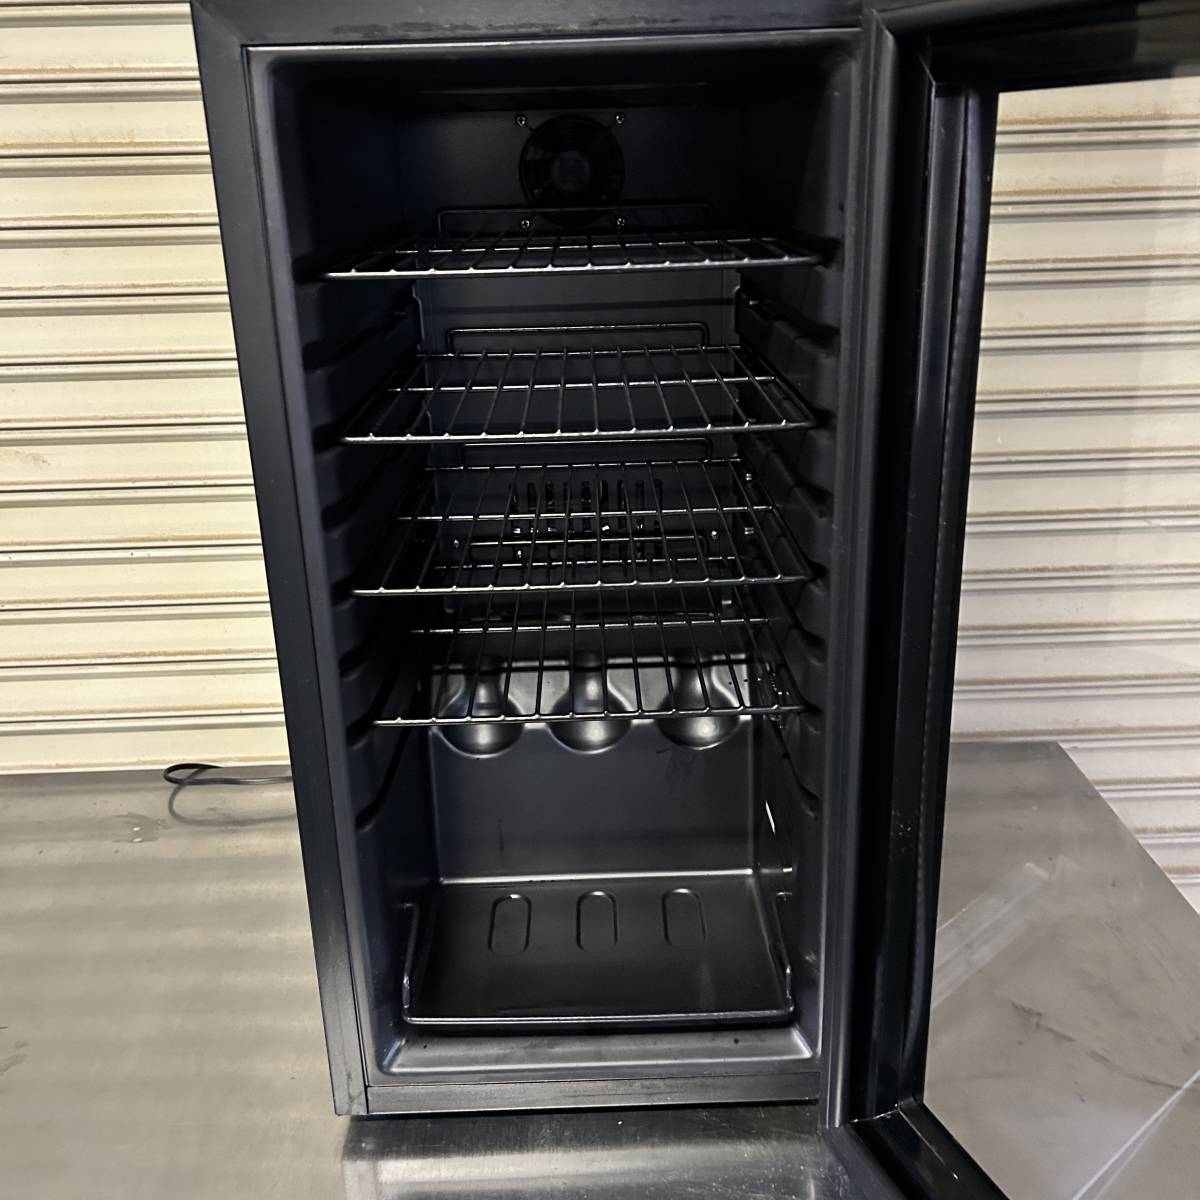 AL36*rufie-ru* 2019 year made wine cellar C15SL 100v store business use for kitchen use 